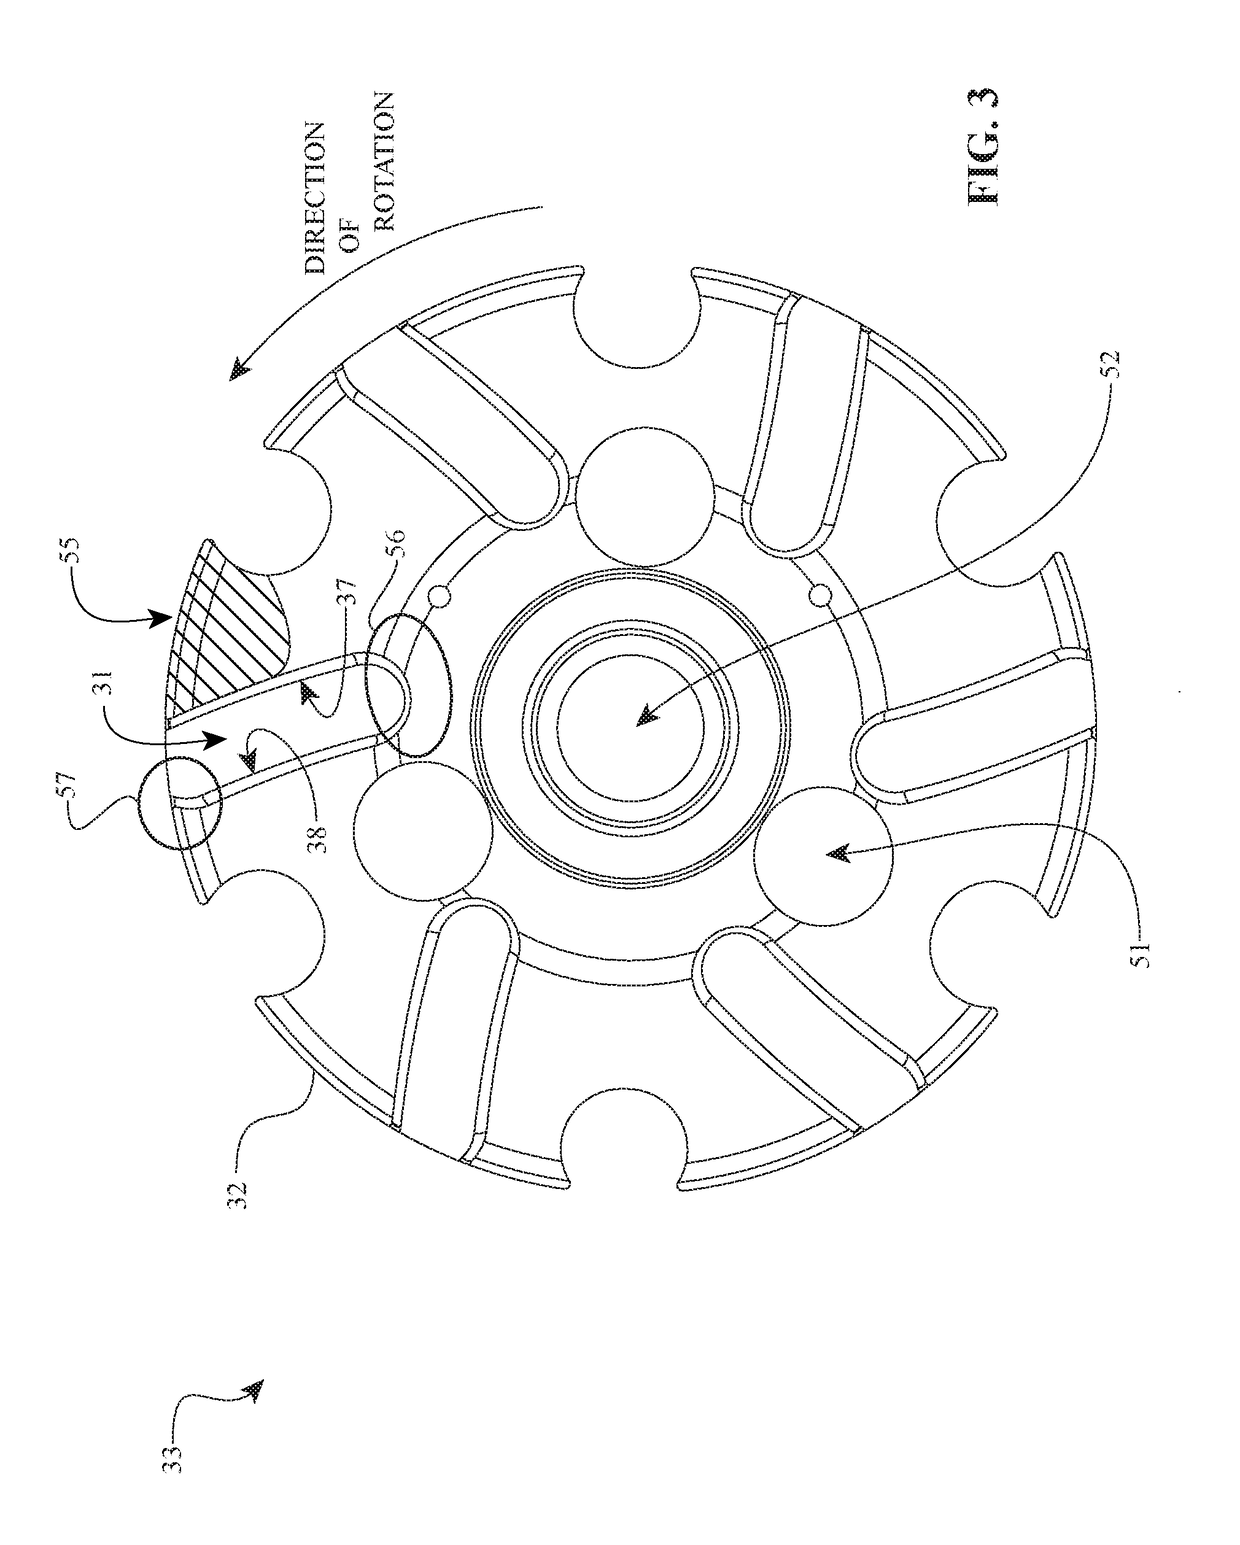 Continuously variable transmissions, systems and methods